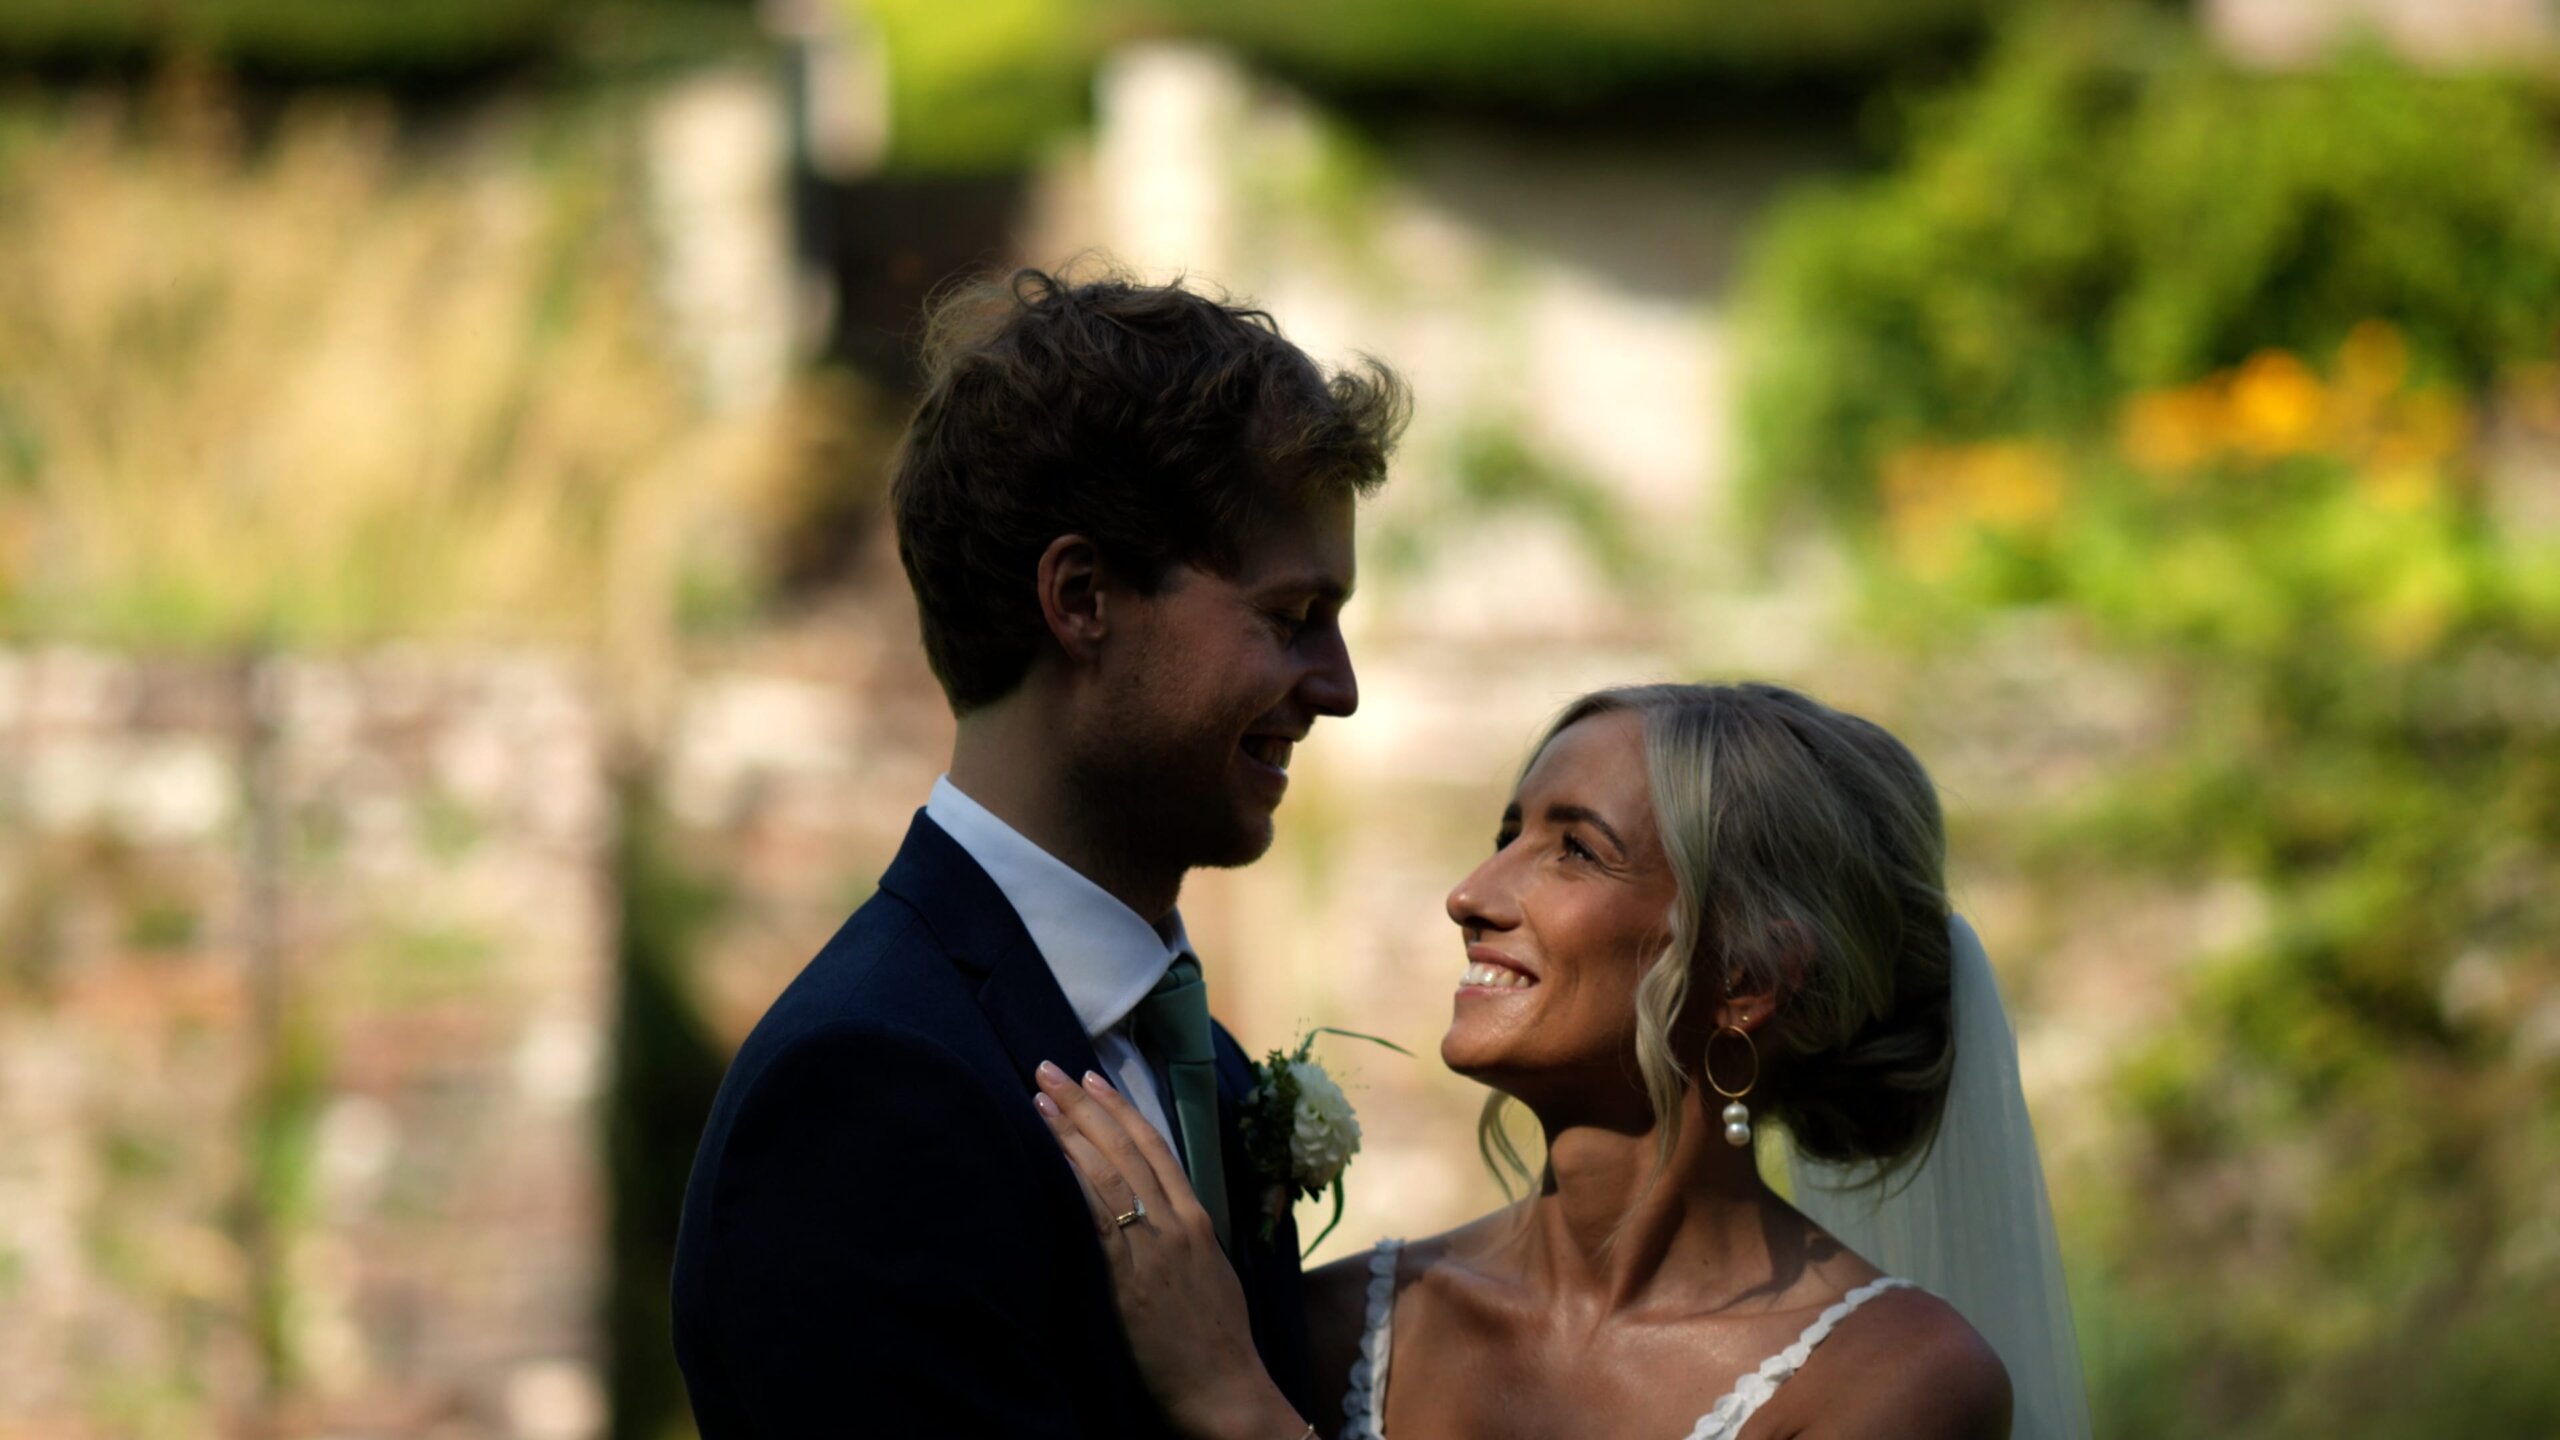 Manchester Wedding Videographer, Homepage Title Image of a Wedding Couple Smiling at each other